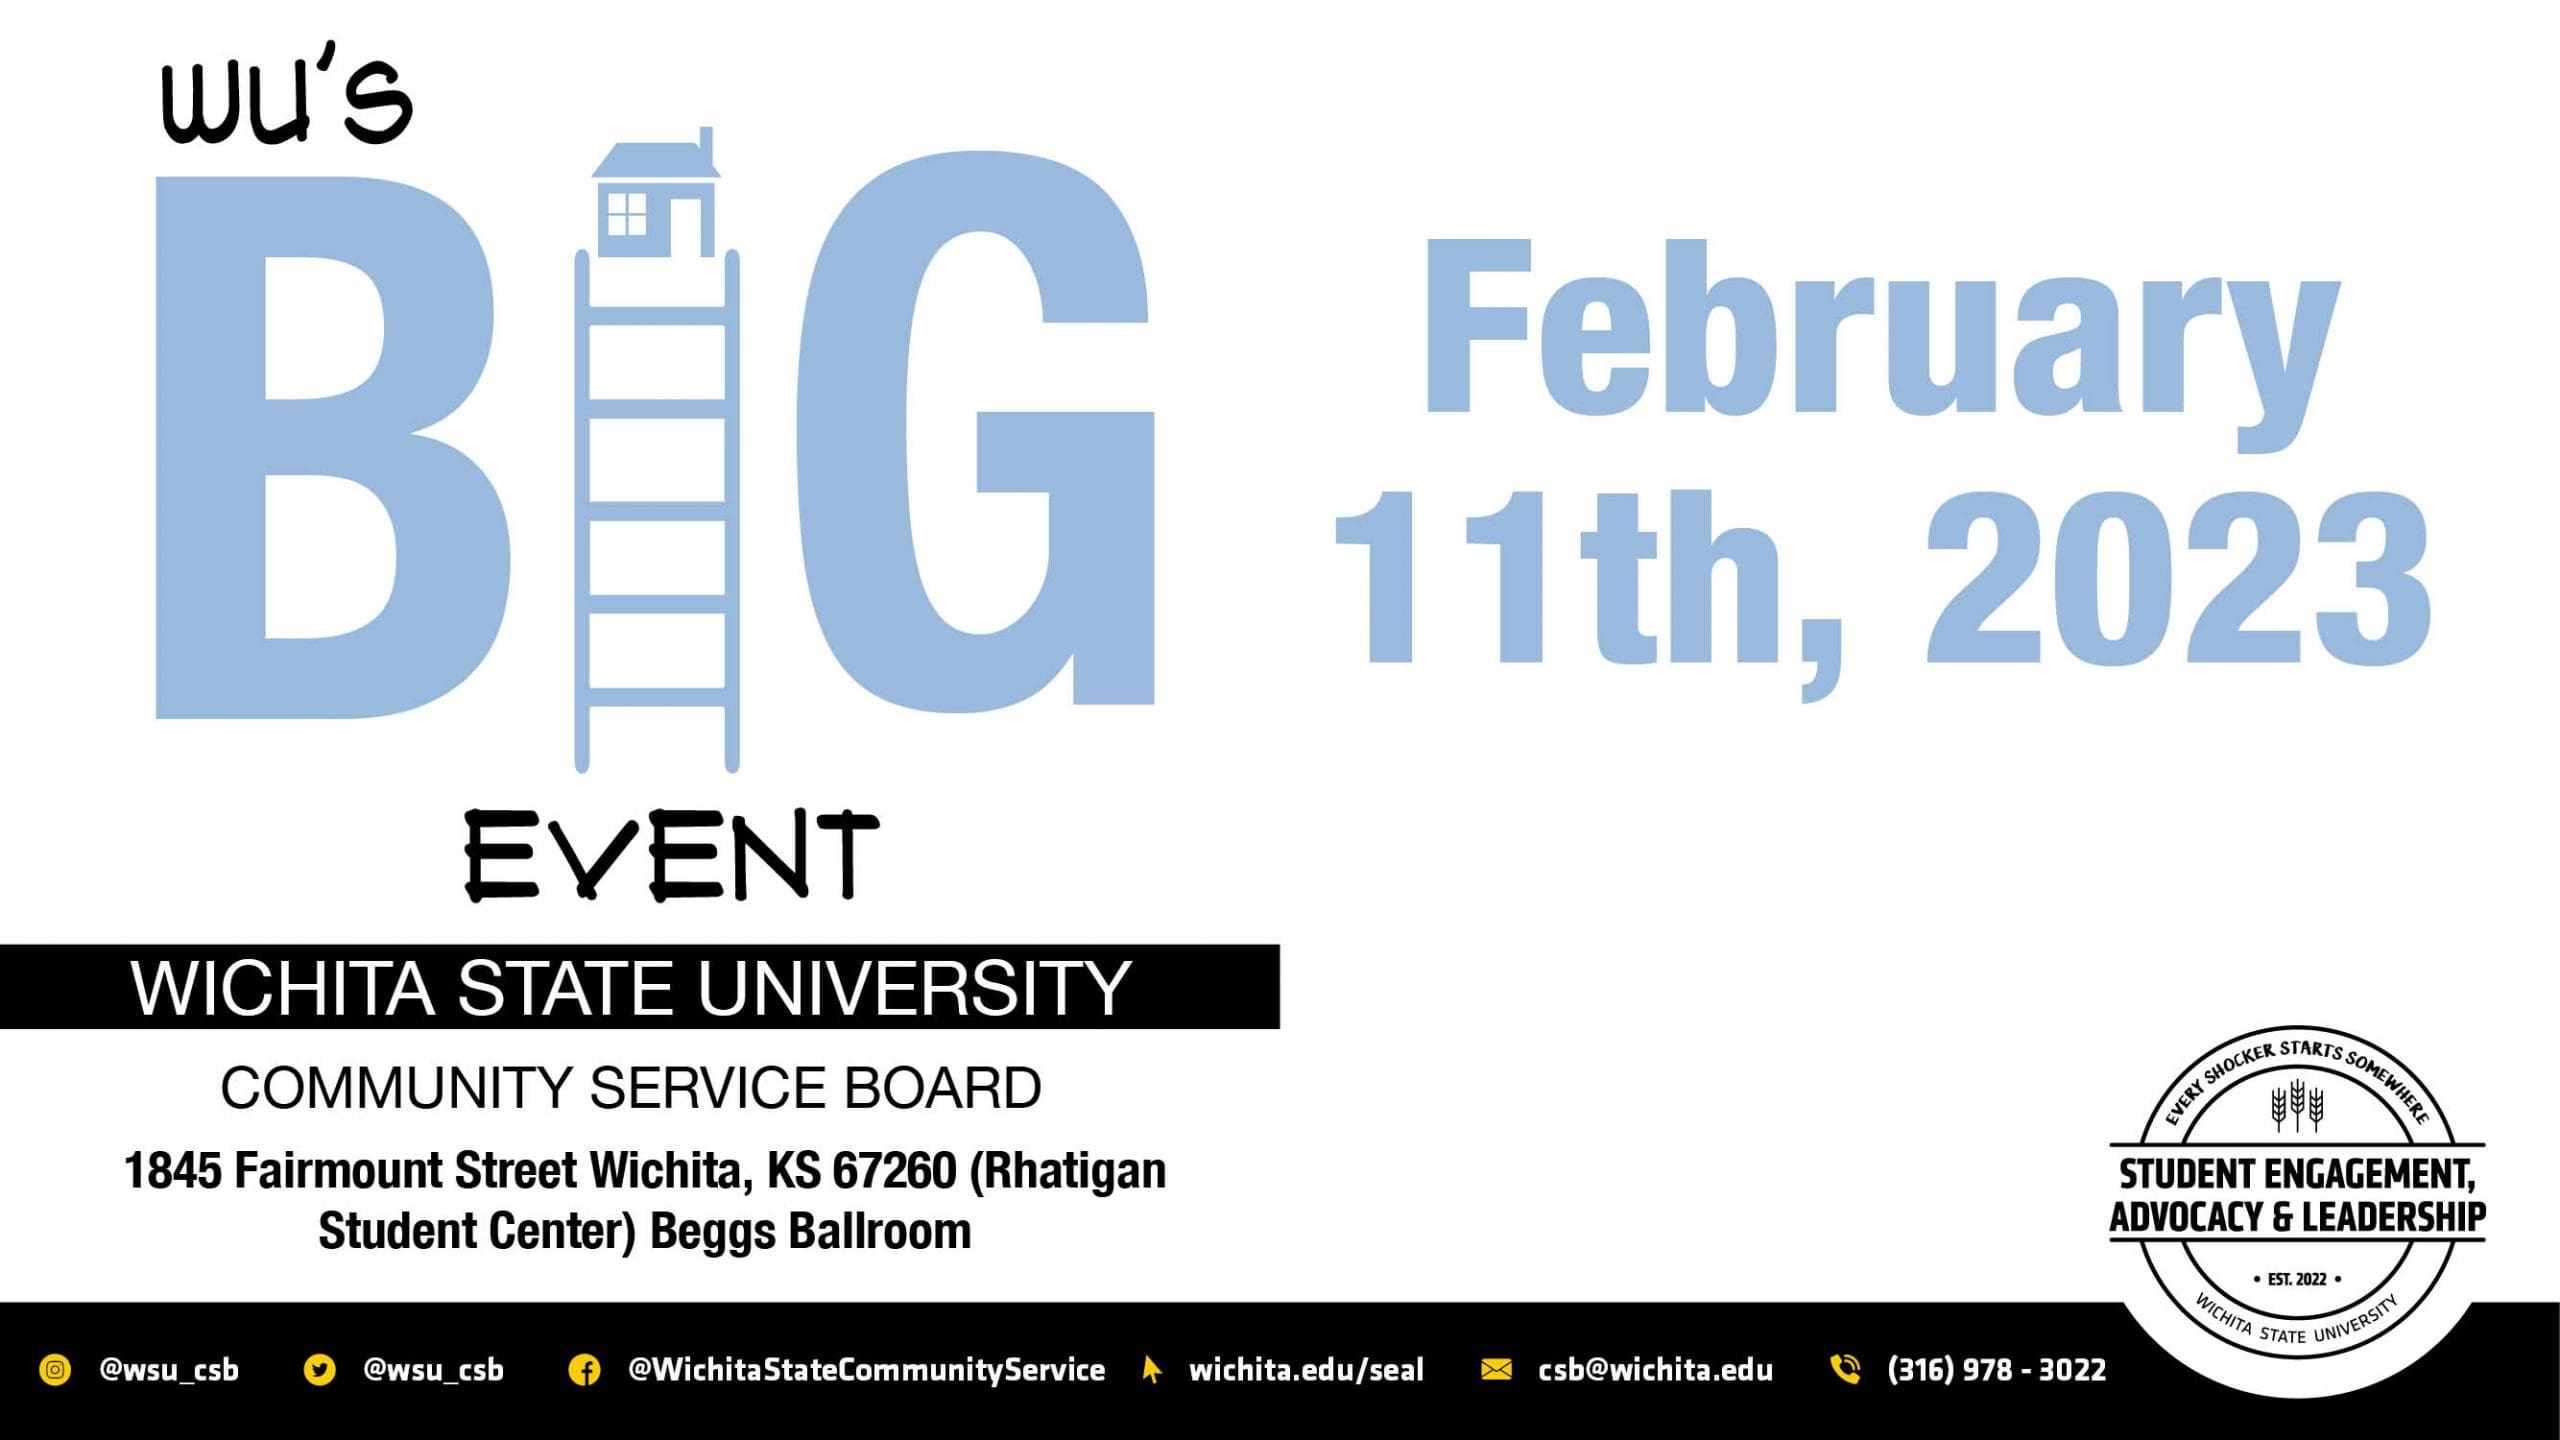 Wu's Big Event, Wichita State University, Community Service Board. February 11th, 2023. 1845 Fairmount Street Wichita, KS 67260 (Rhatigan Student Center) Beggs Ballroom. Additional Information may be found on Twitter and Instagram @wsu_csb. Facebook @wichitastate_communityservice, on our website at www.wichita.edu/SEAL or contact us via email at csb@wichita.edu or by calling us at 316-978-3022.